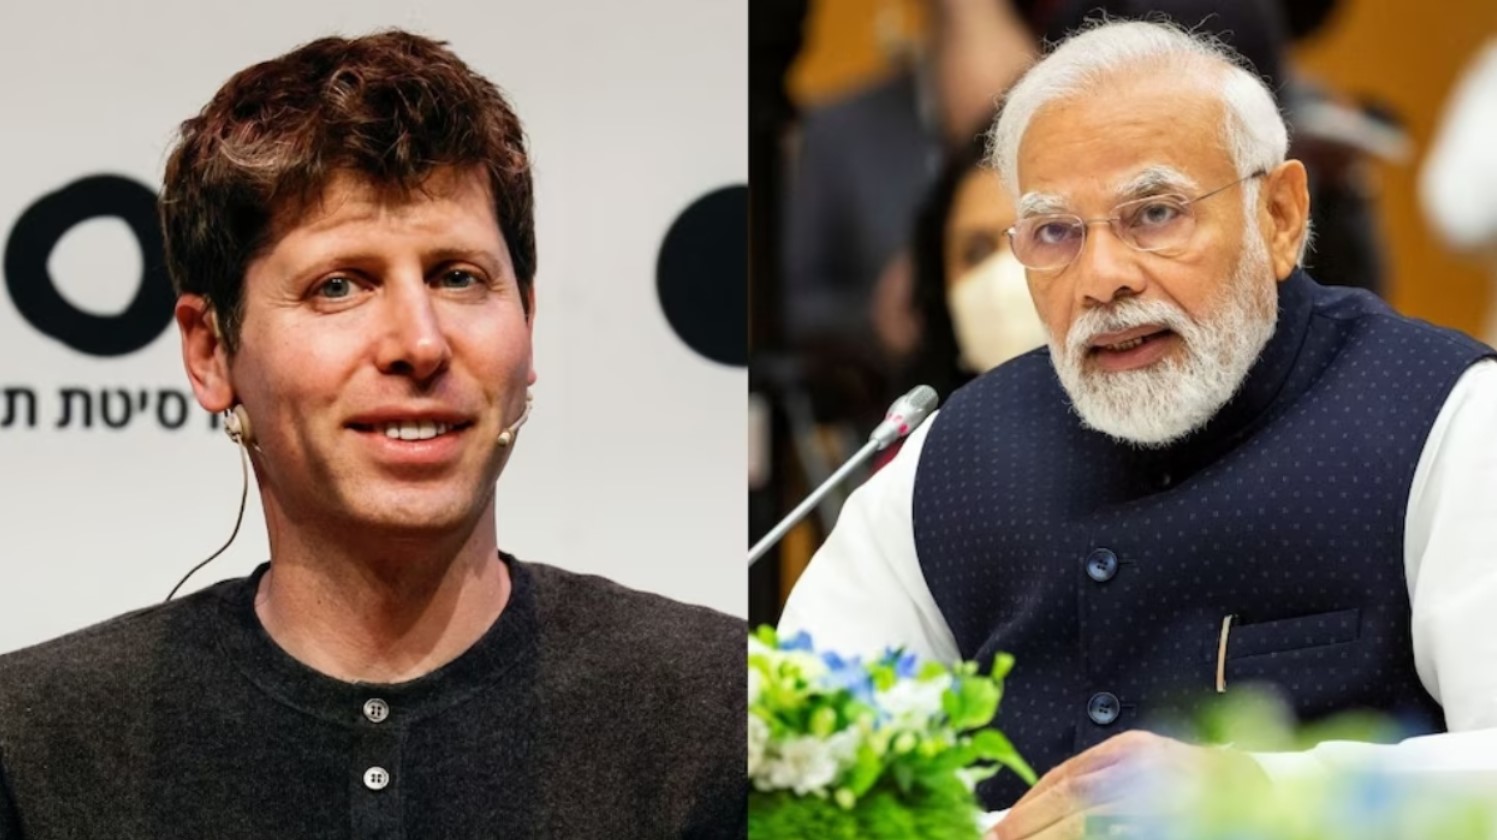 OpenAI CEO Sam Altman Engages in In-Depth Discussion on India's Tech Ecosystem with PM Modi - Web Stories - Tech News India - Tech Updates - Before You Take 1